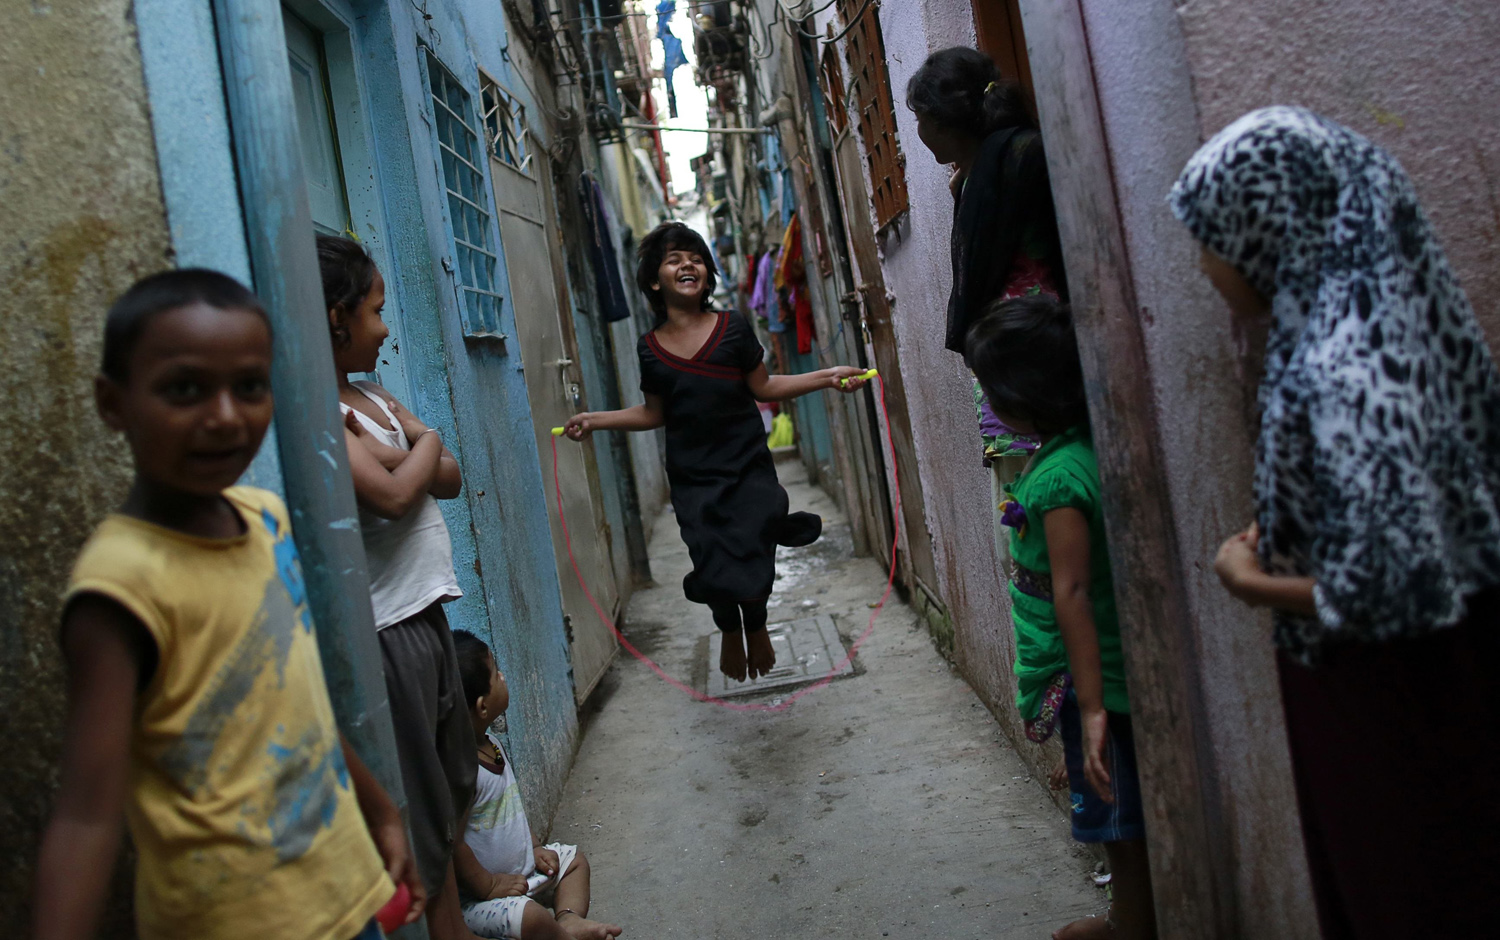 A girl jumps rope in an alley as others watch in Dharavi, one of Asia's largest slums in Mumbai on May 28, 2014.